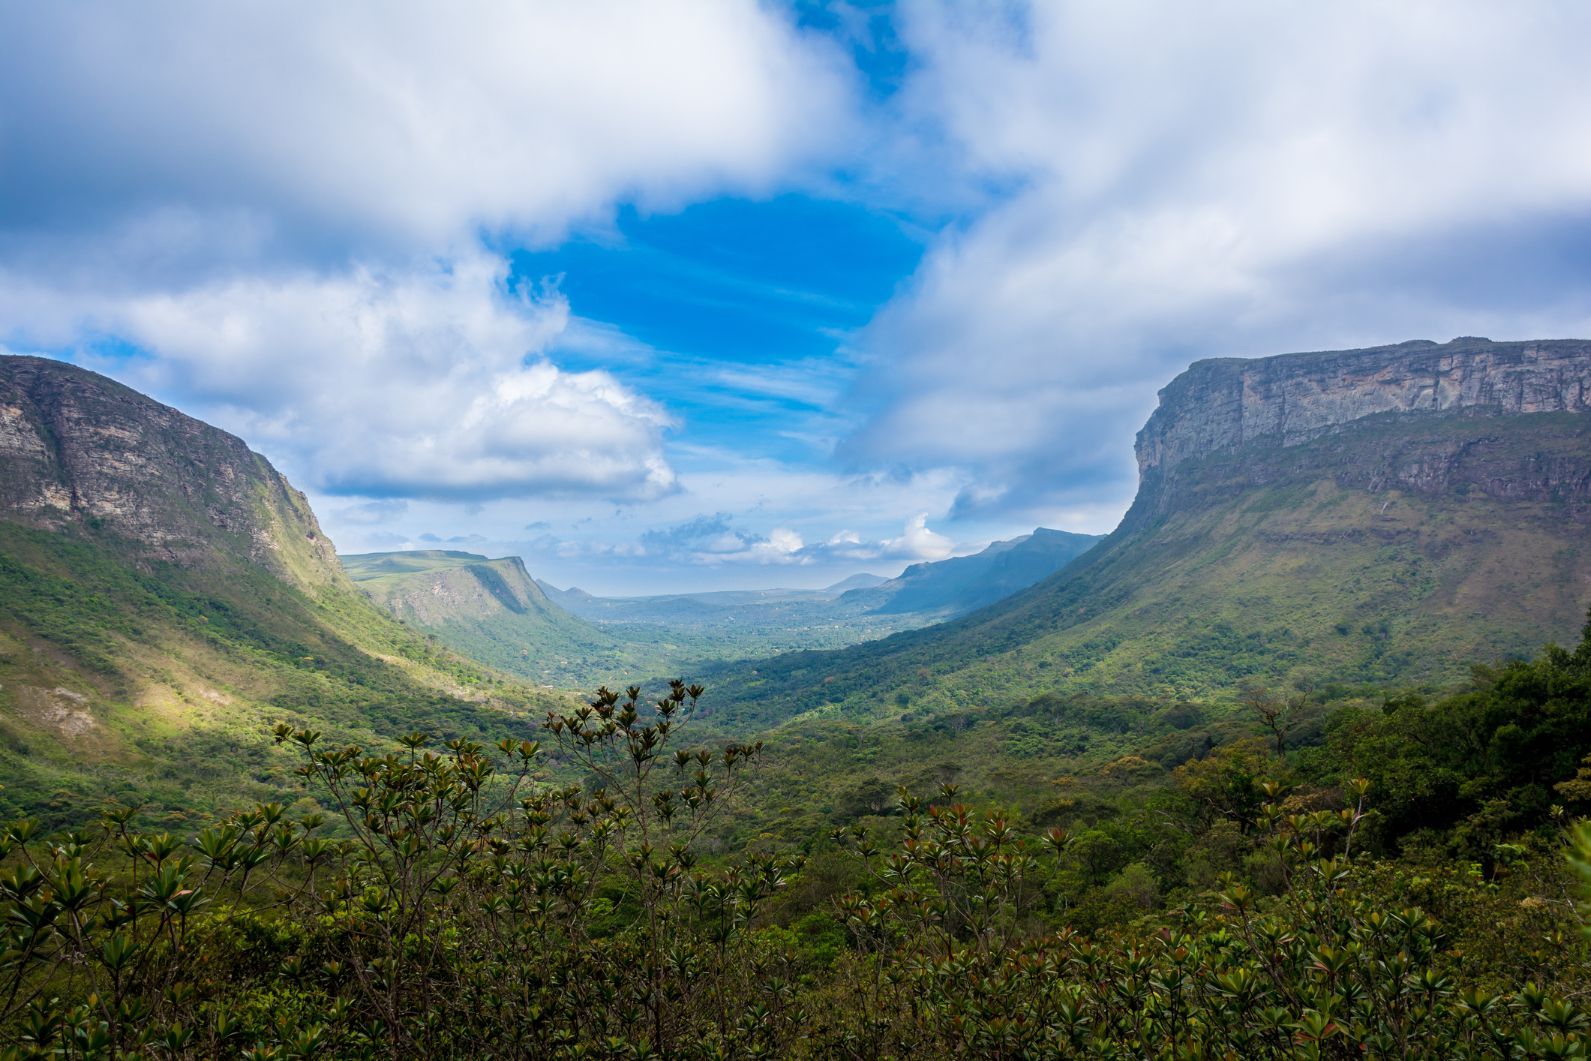 A stunning view over the U-shaped valley of the Vale do Pati. Photo: Getty